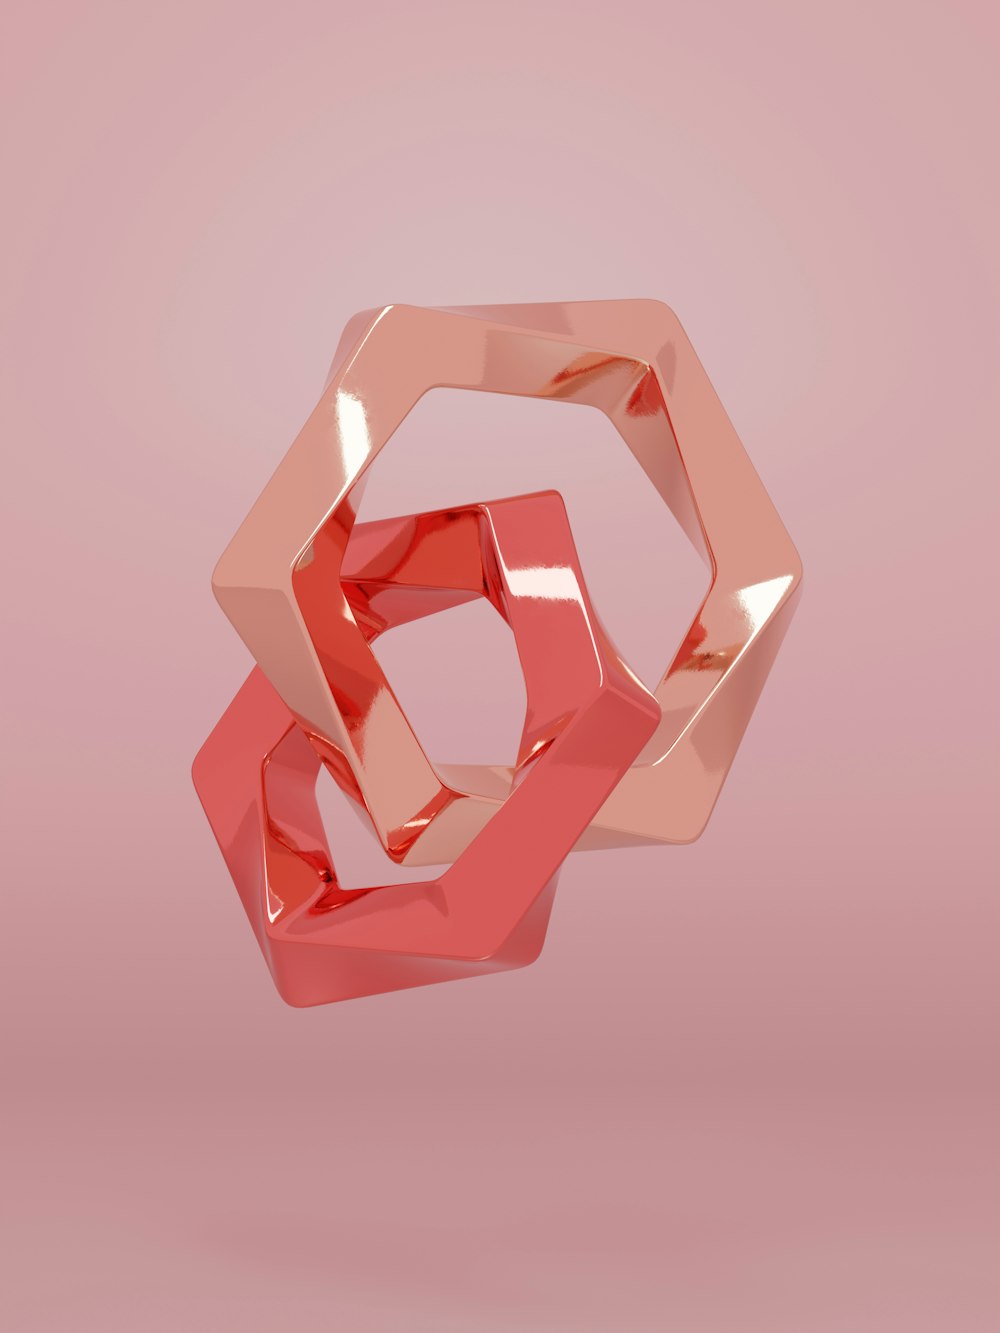 a 3d image of a pink object on a pink background